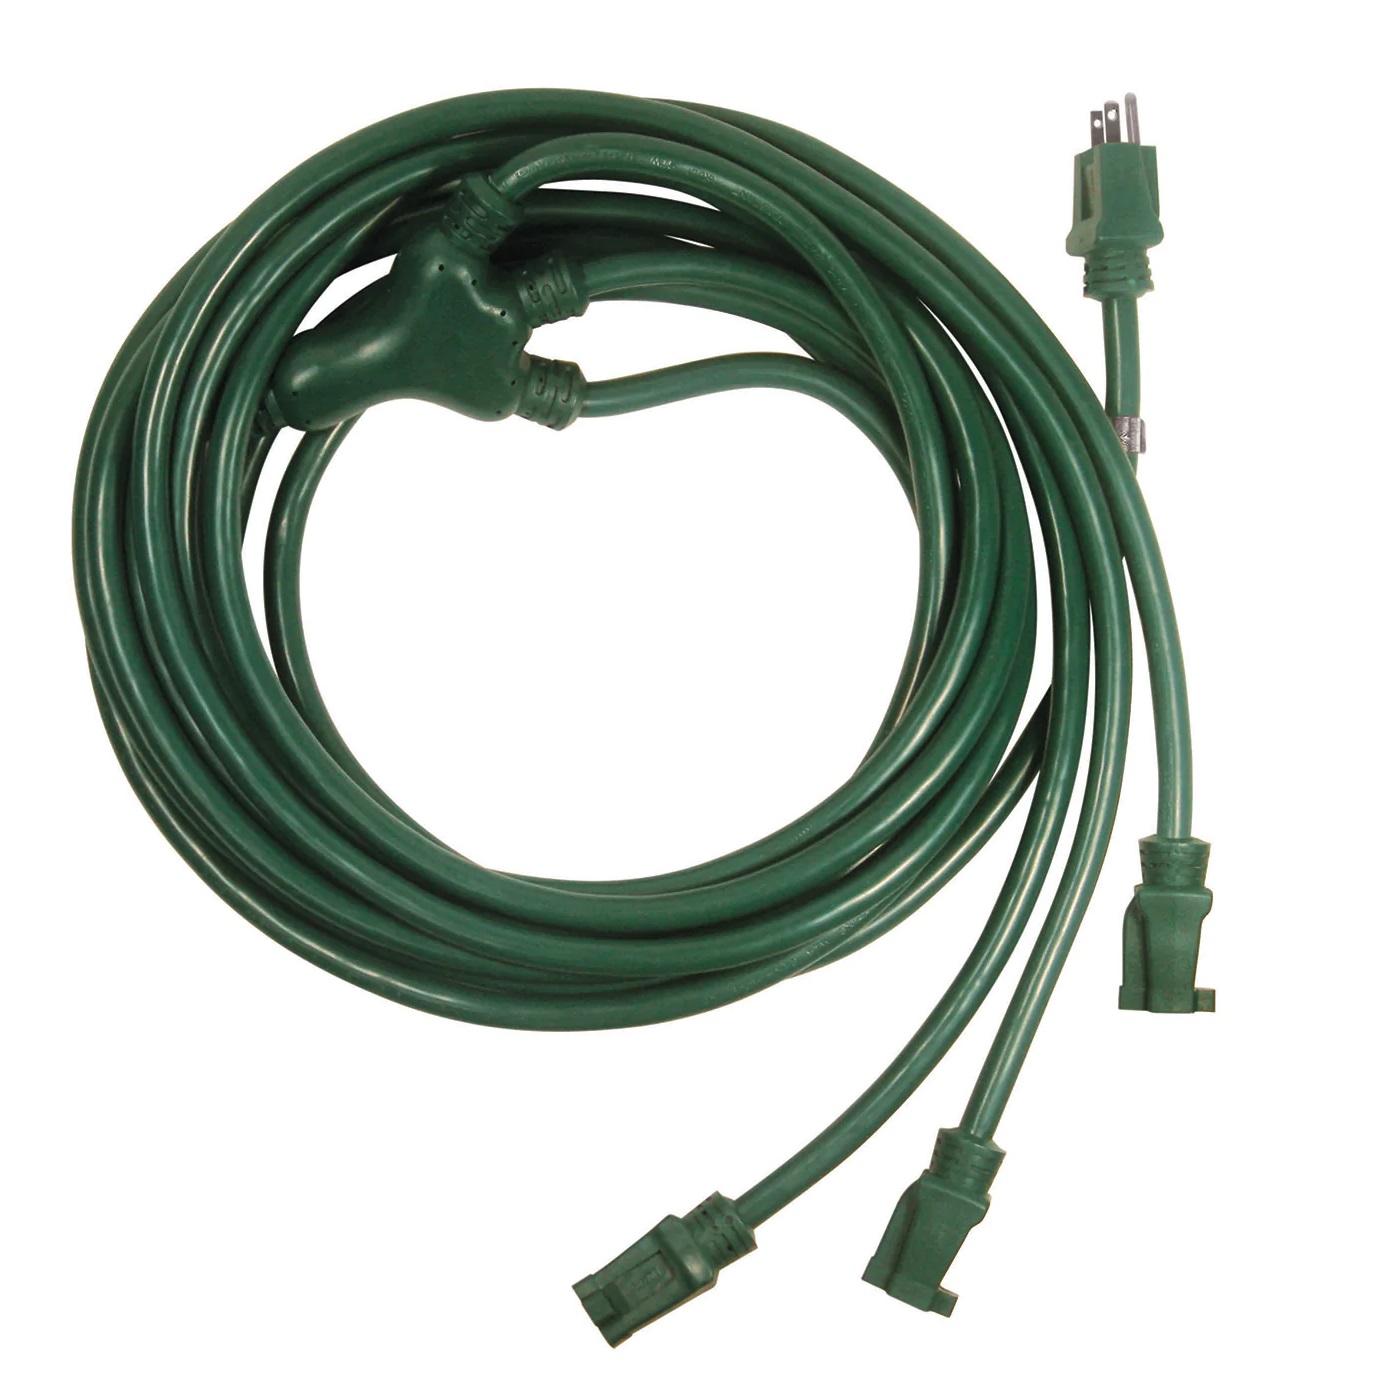 Img for product 23FT 14/3 STW Green Triple Line " W" Cord - AD190723